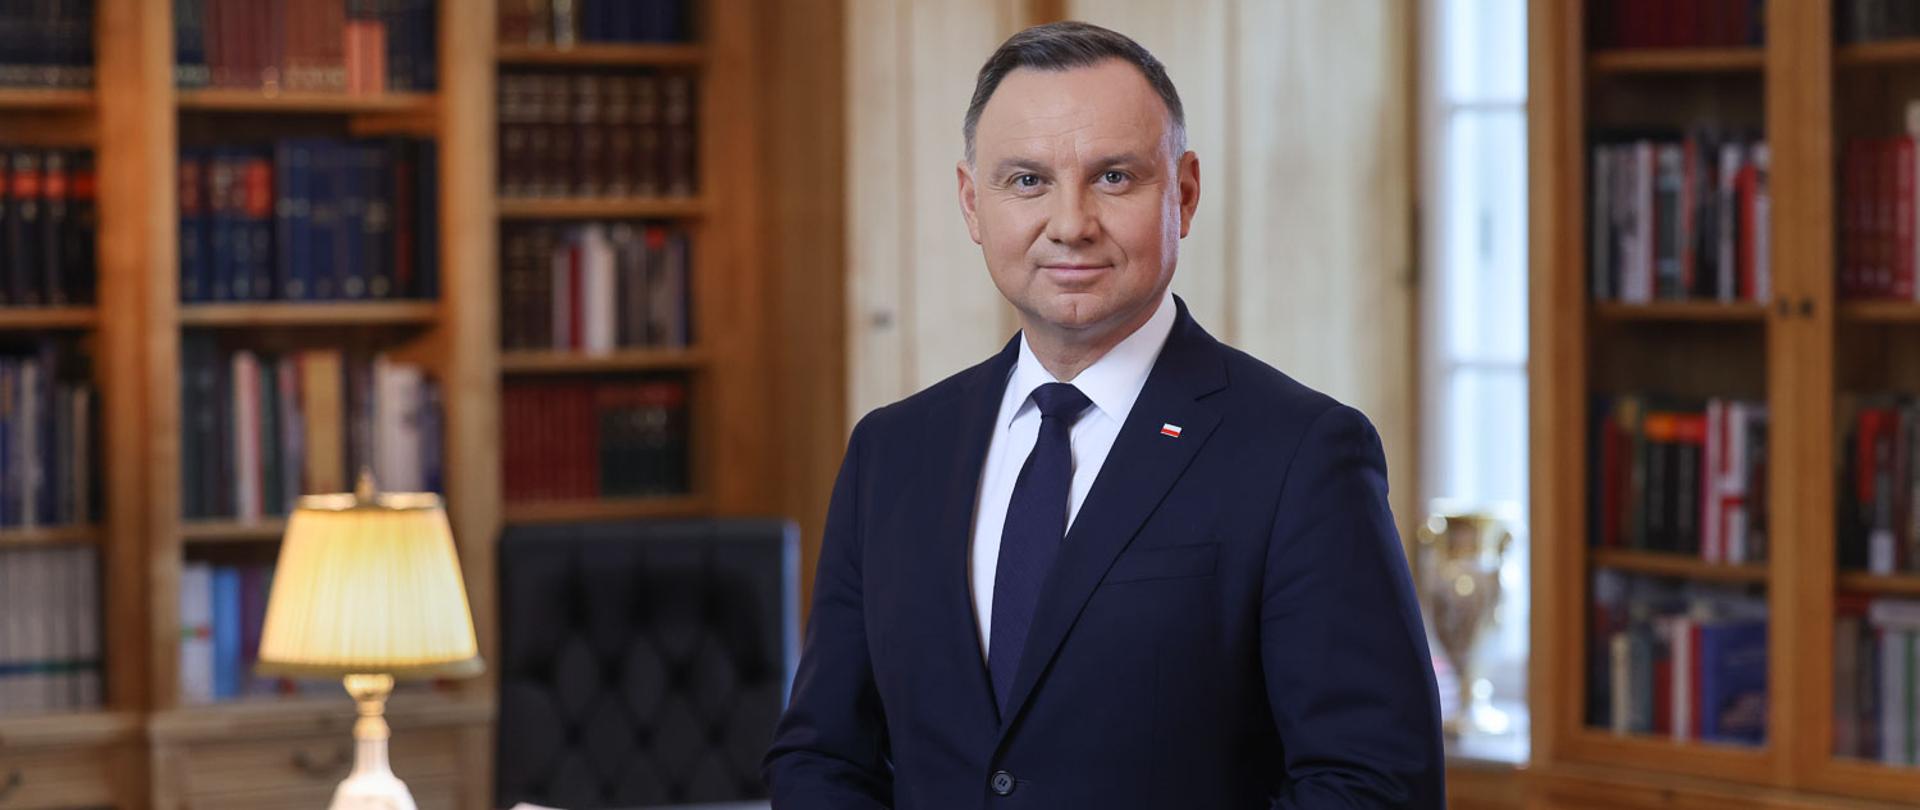 President of the Republic of Poland Andrzej Duda - the Summit for Democracy